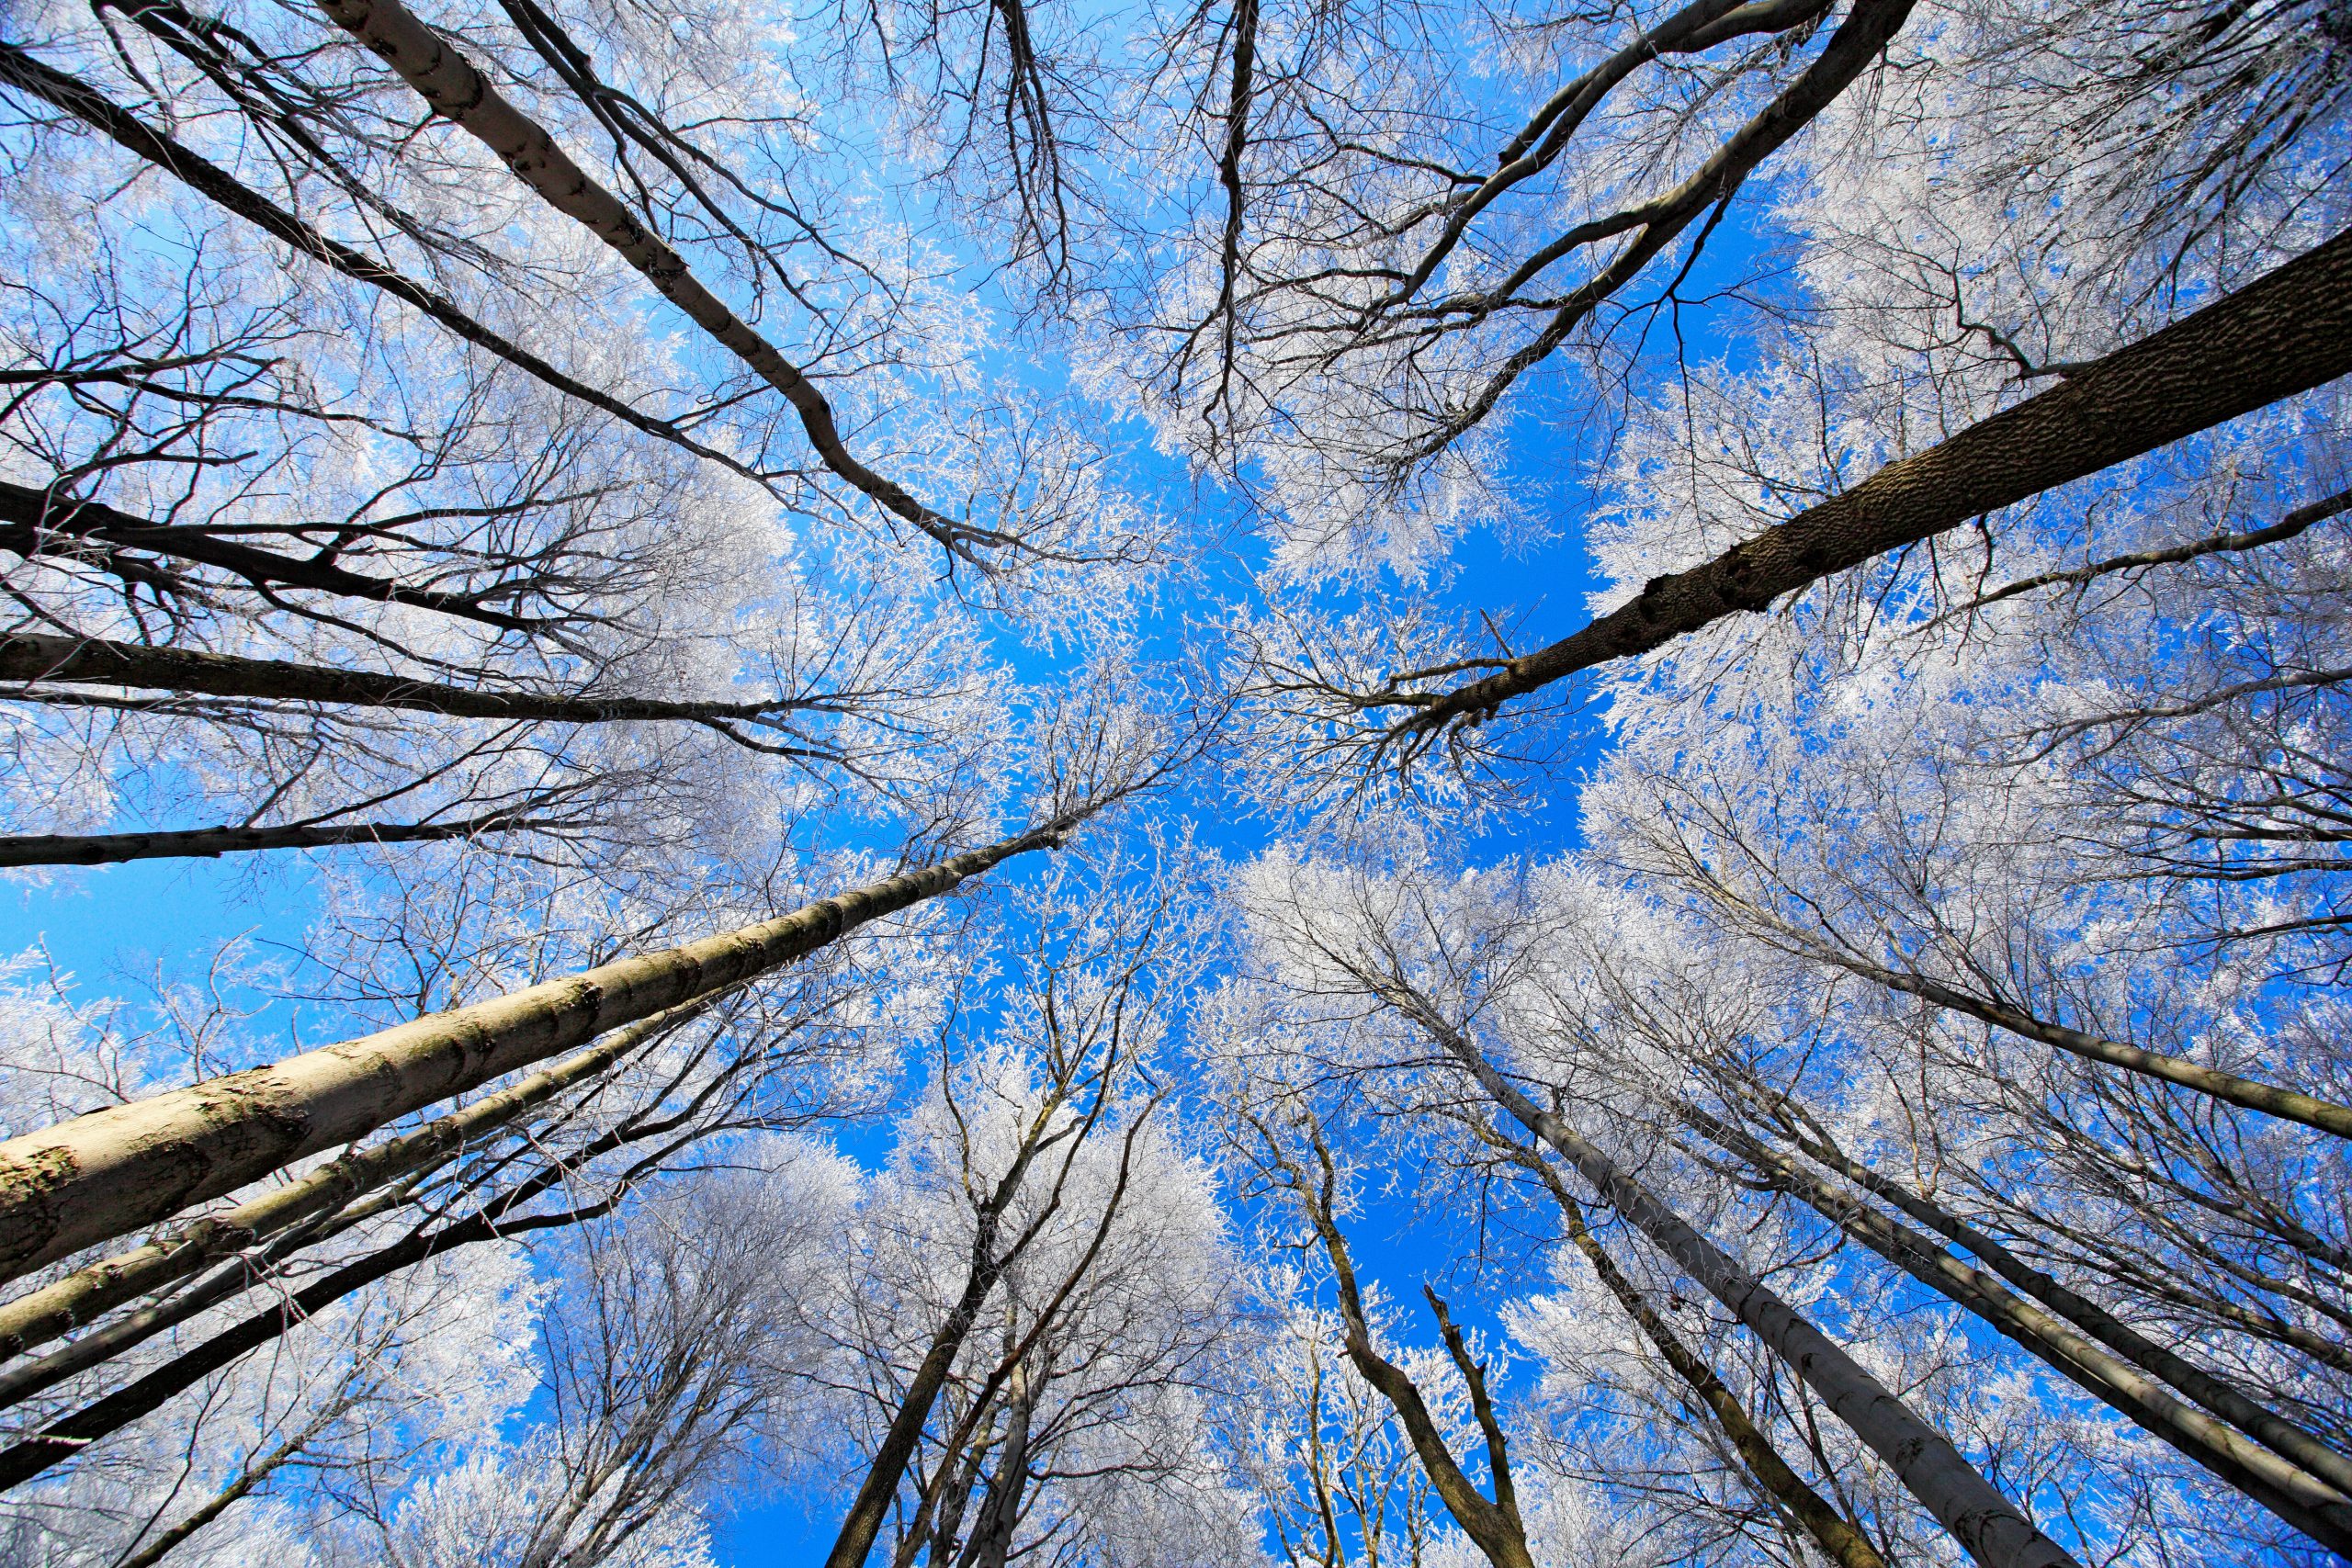 Keywords: sky;tree;blue;dark;mountain;scene;hill;cold;snowy;clear;nobody;natural;park;white;cloud;travel;view;january;day;freeze;top;sun;ice;season;wood;tall;treetop;forest;climate;winter;wilderness;weather;terrain;mist;beauty;outdoors;scenic;country;tourism;frost;beautiful;snow;rime;nature;idyllic;europe;oak;landscape;glaze;germany